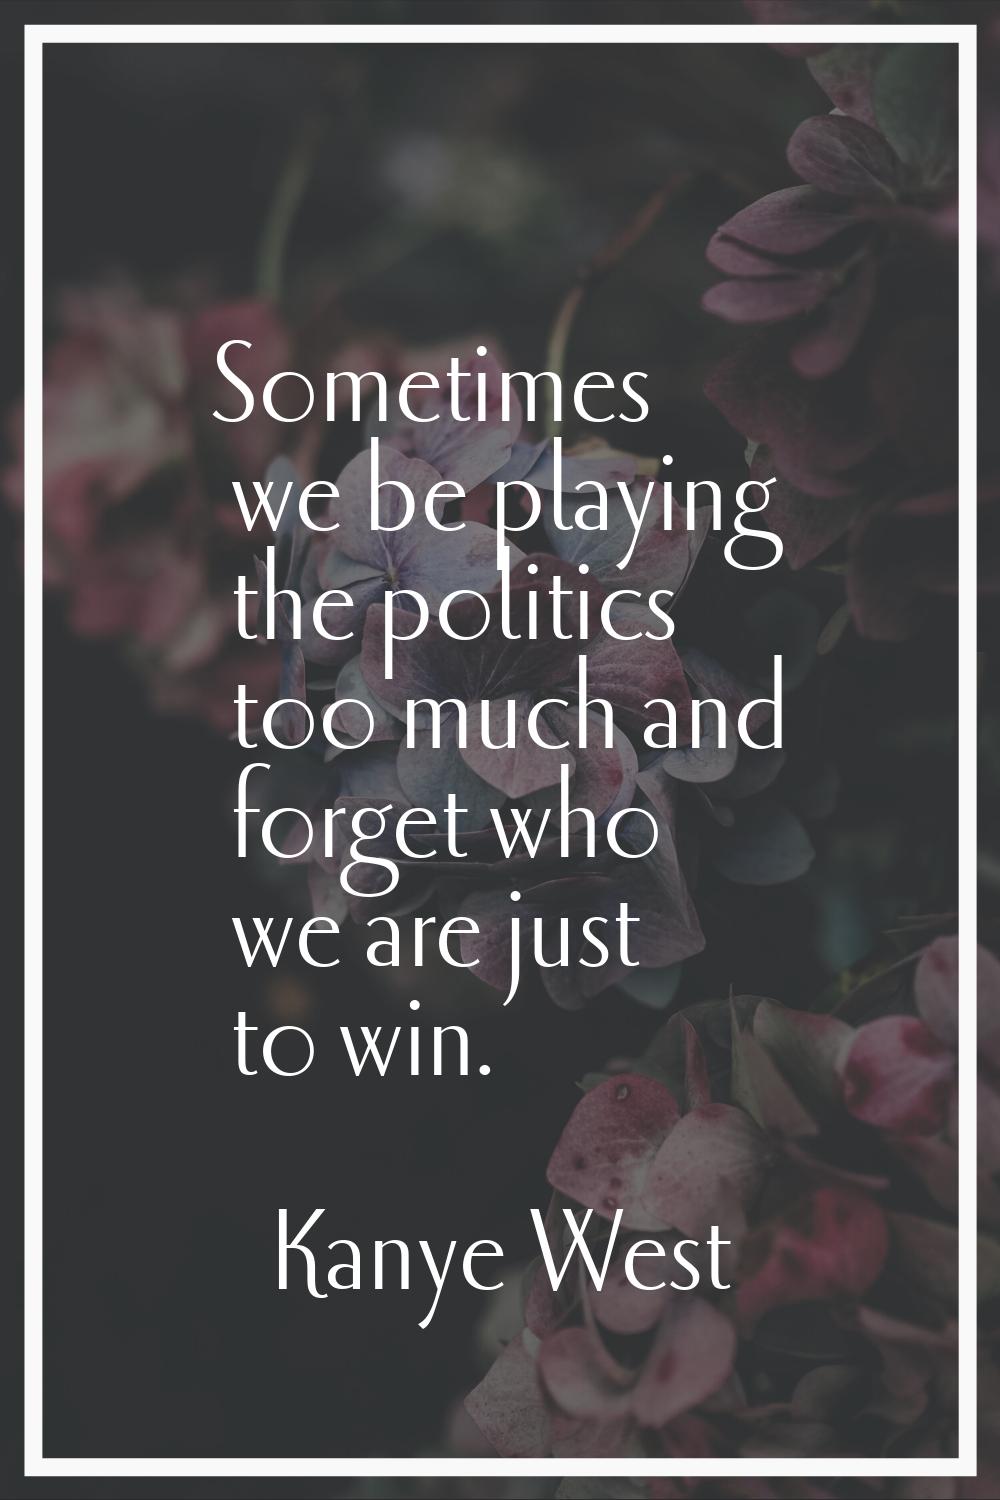 Sometimes we be playing the politics too much and forget who we are just to win.